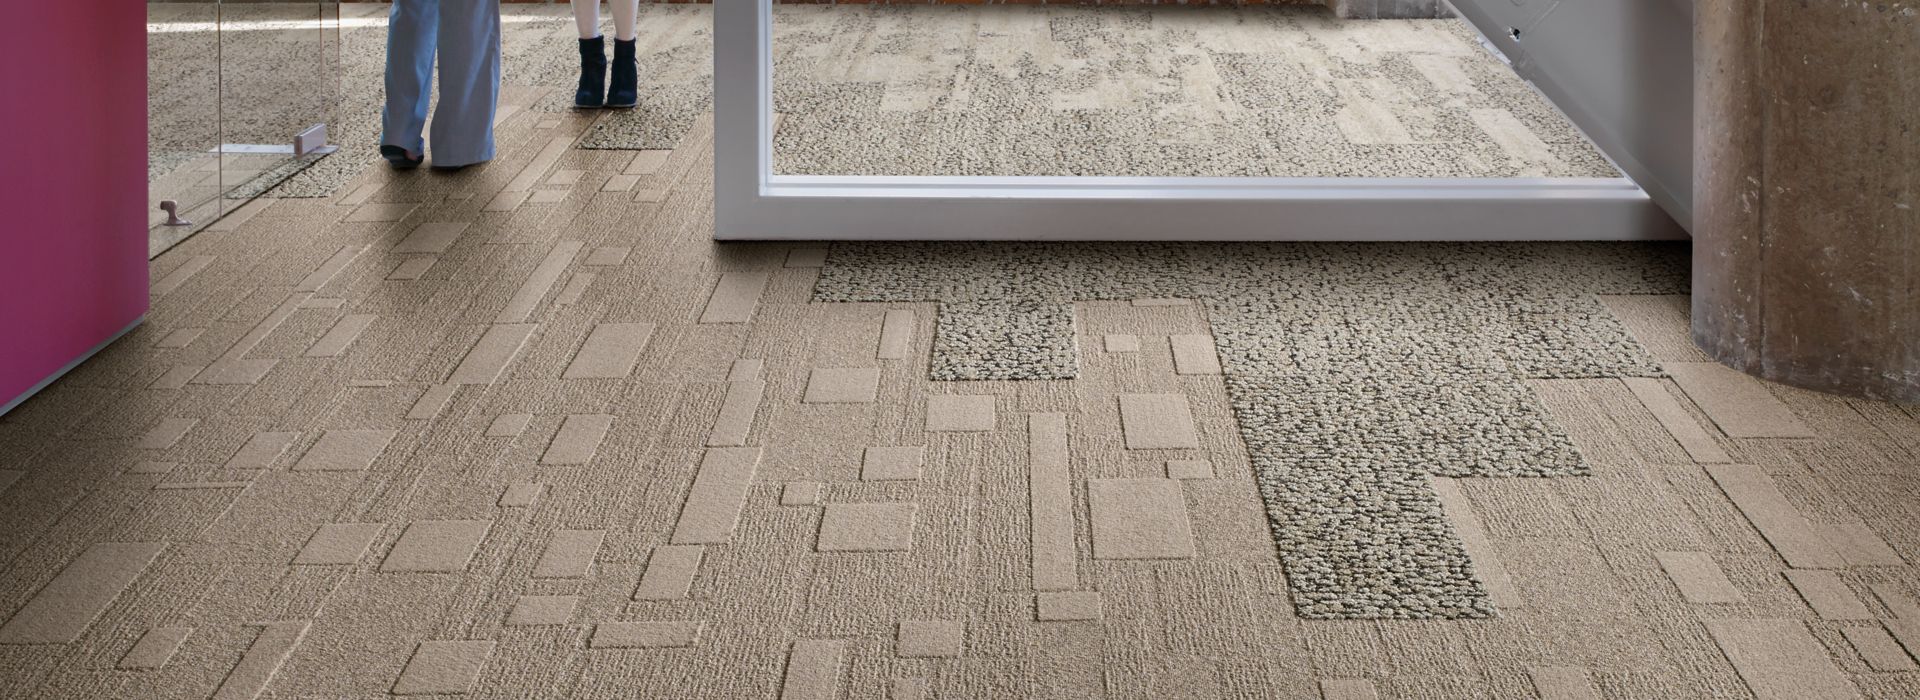 Interface EM552 plank carpet tile in with diagnal column and two women talking imagen número 1